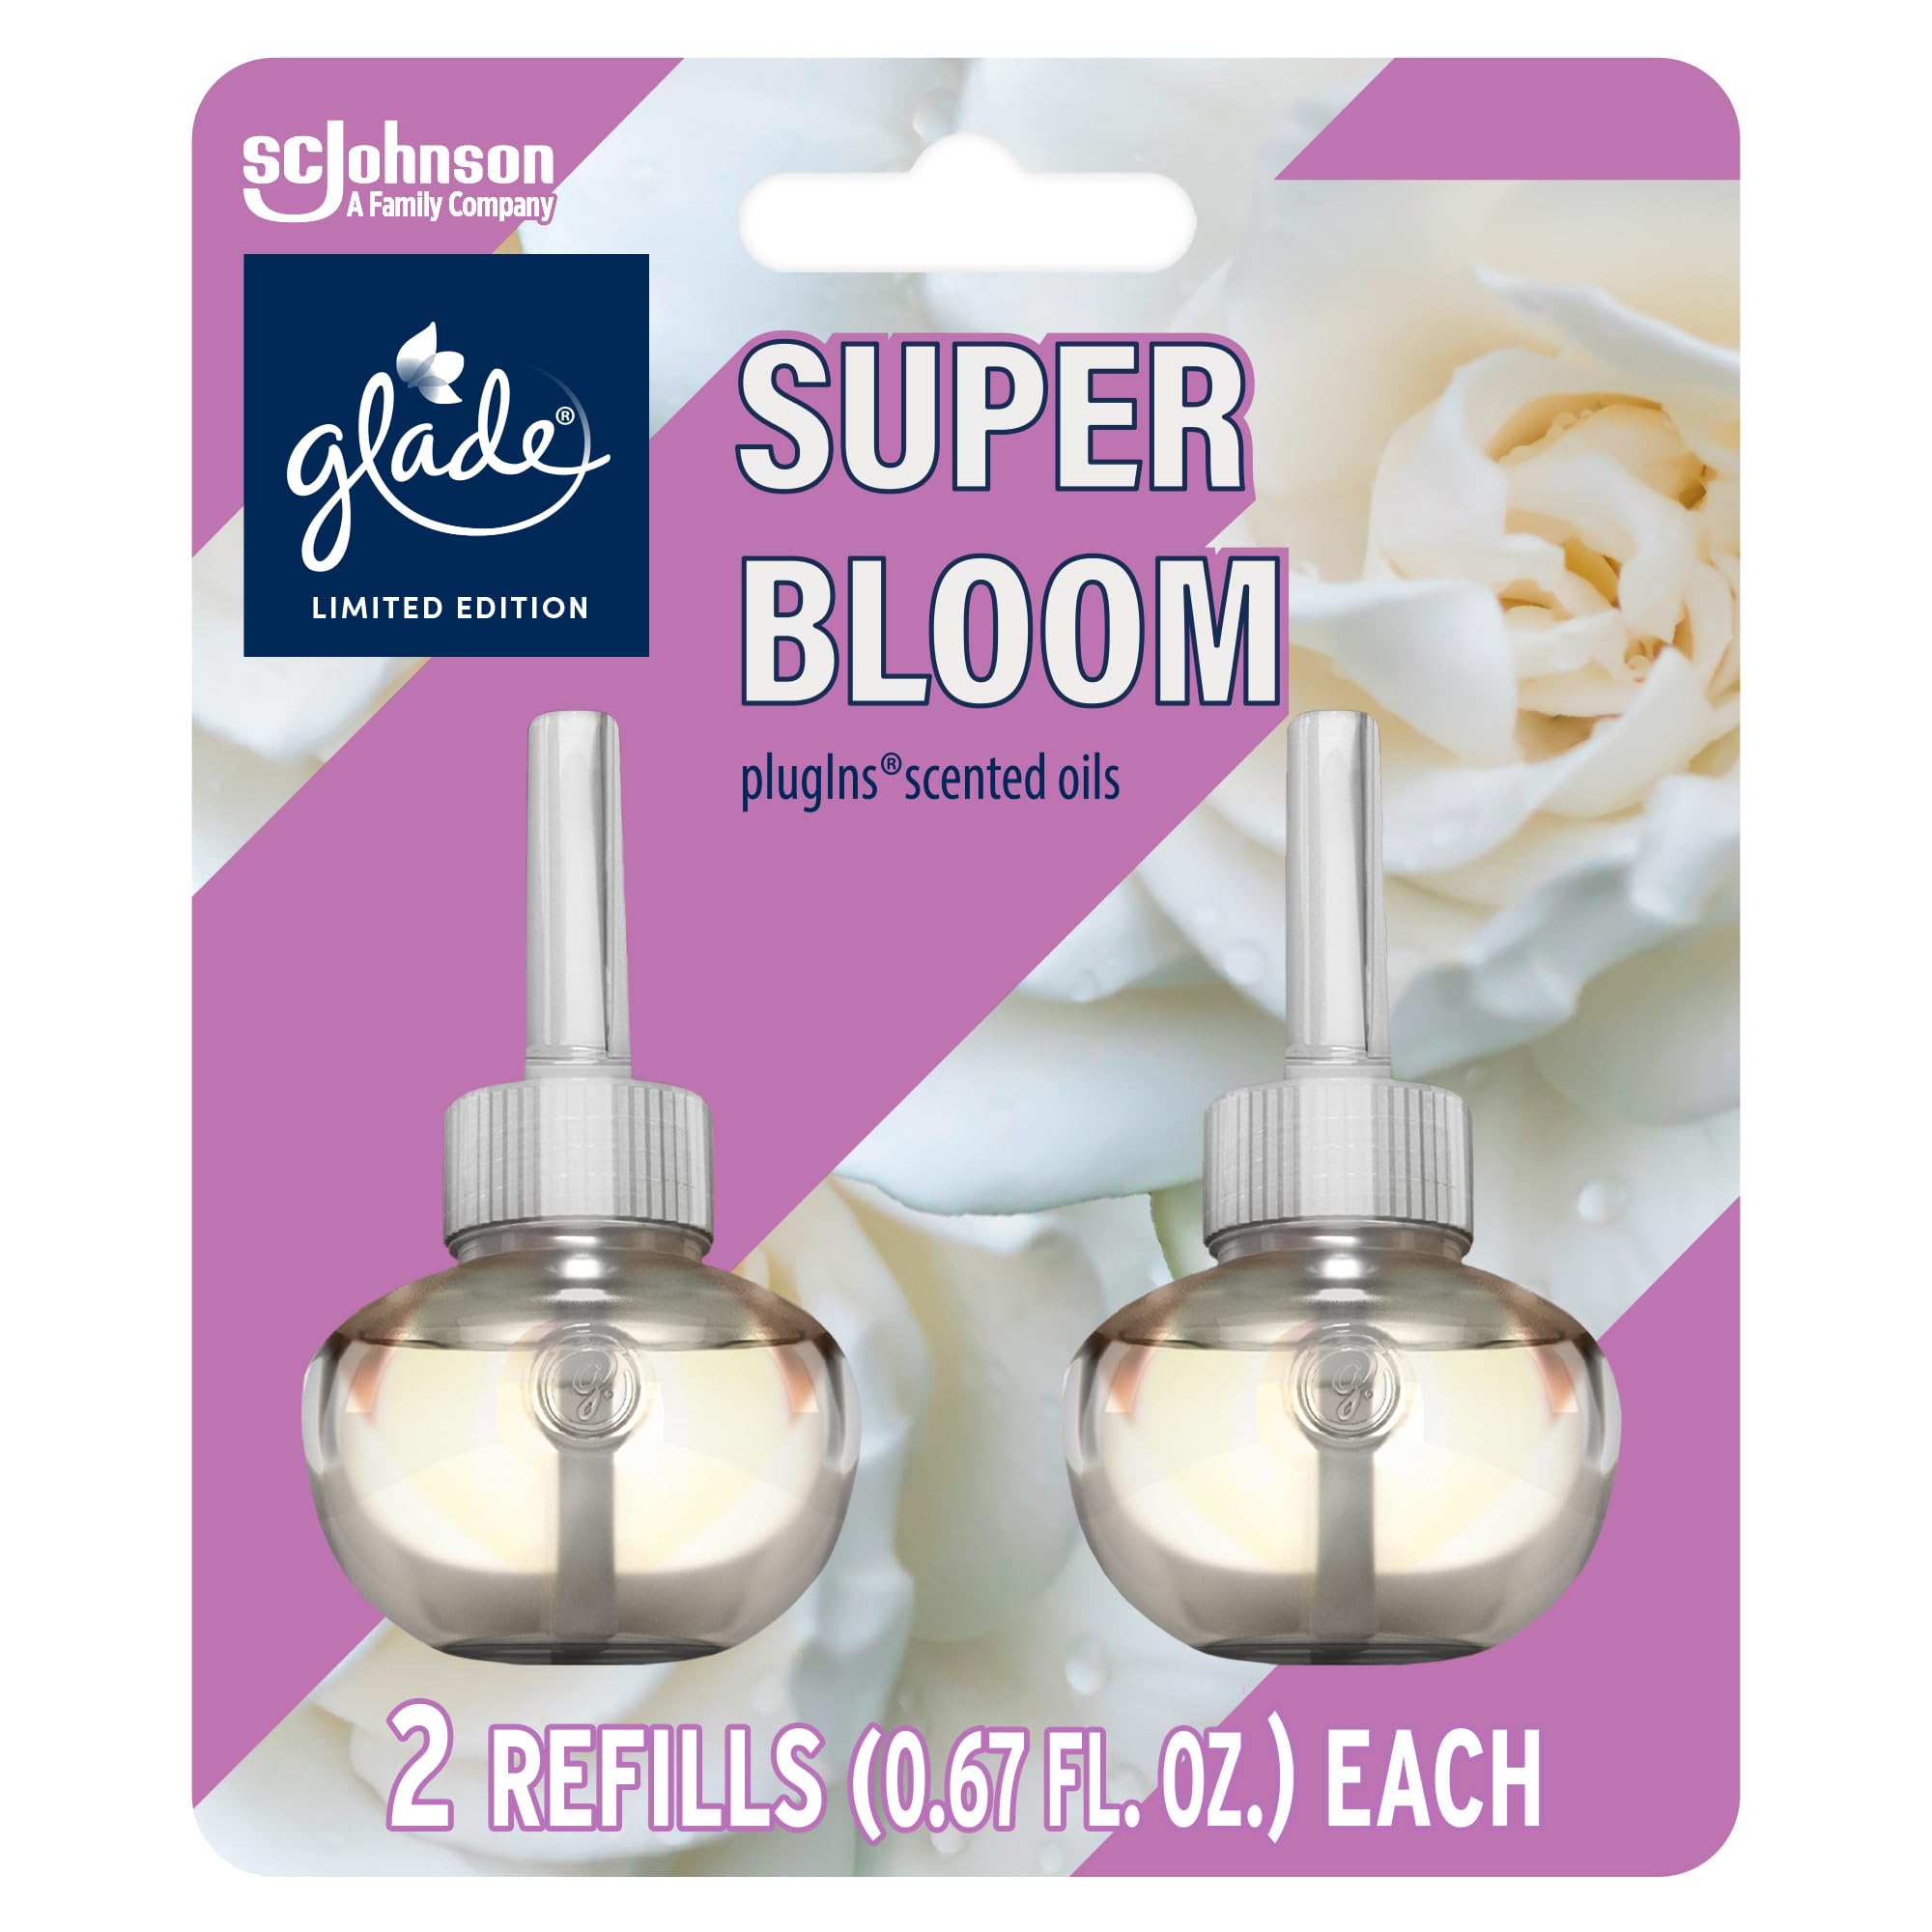 Glade PlugIns Refills Air Freshener, Scented and Essential Oils for Home and Bathroom, Super Bloom, 1.34 Fl Oz, 2 Count